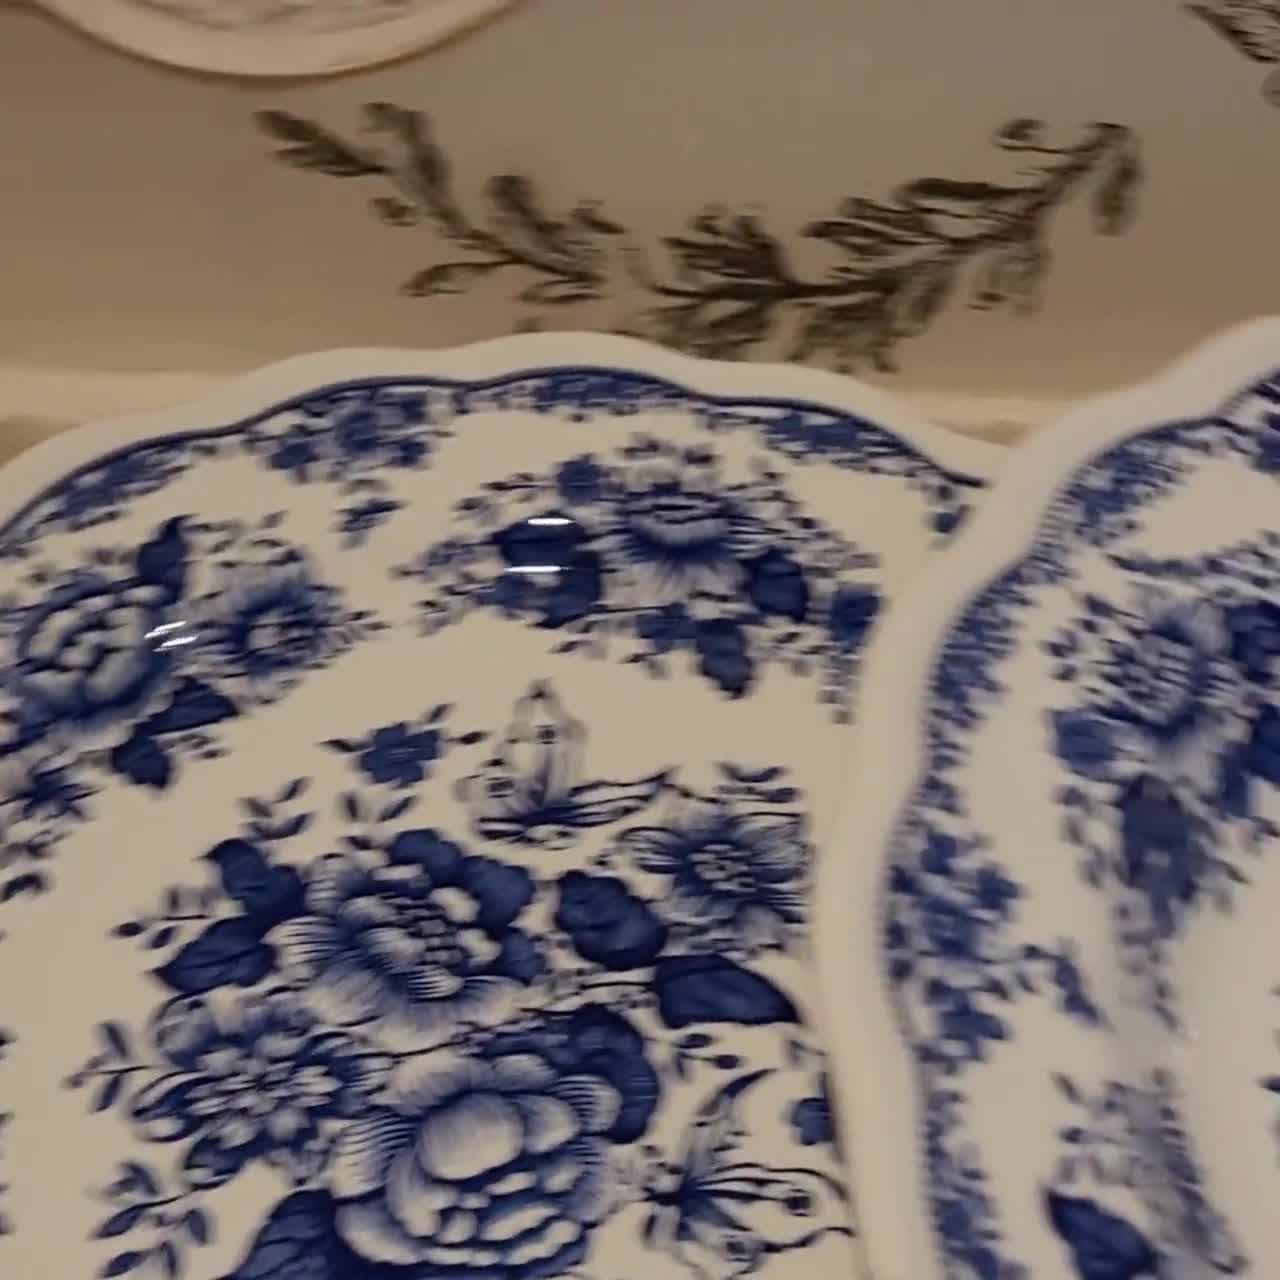 Trio of blue earthenware plates by N. Fontebasso 1760. Italian blue and  white plates.